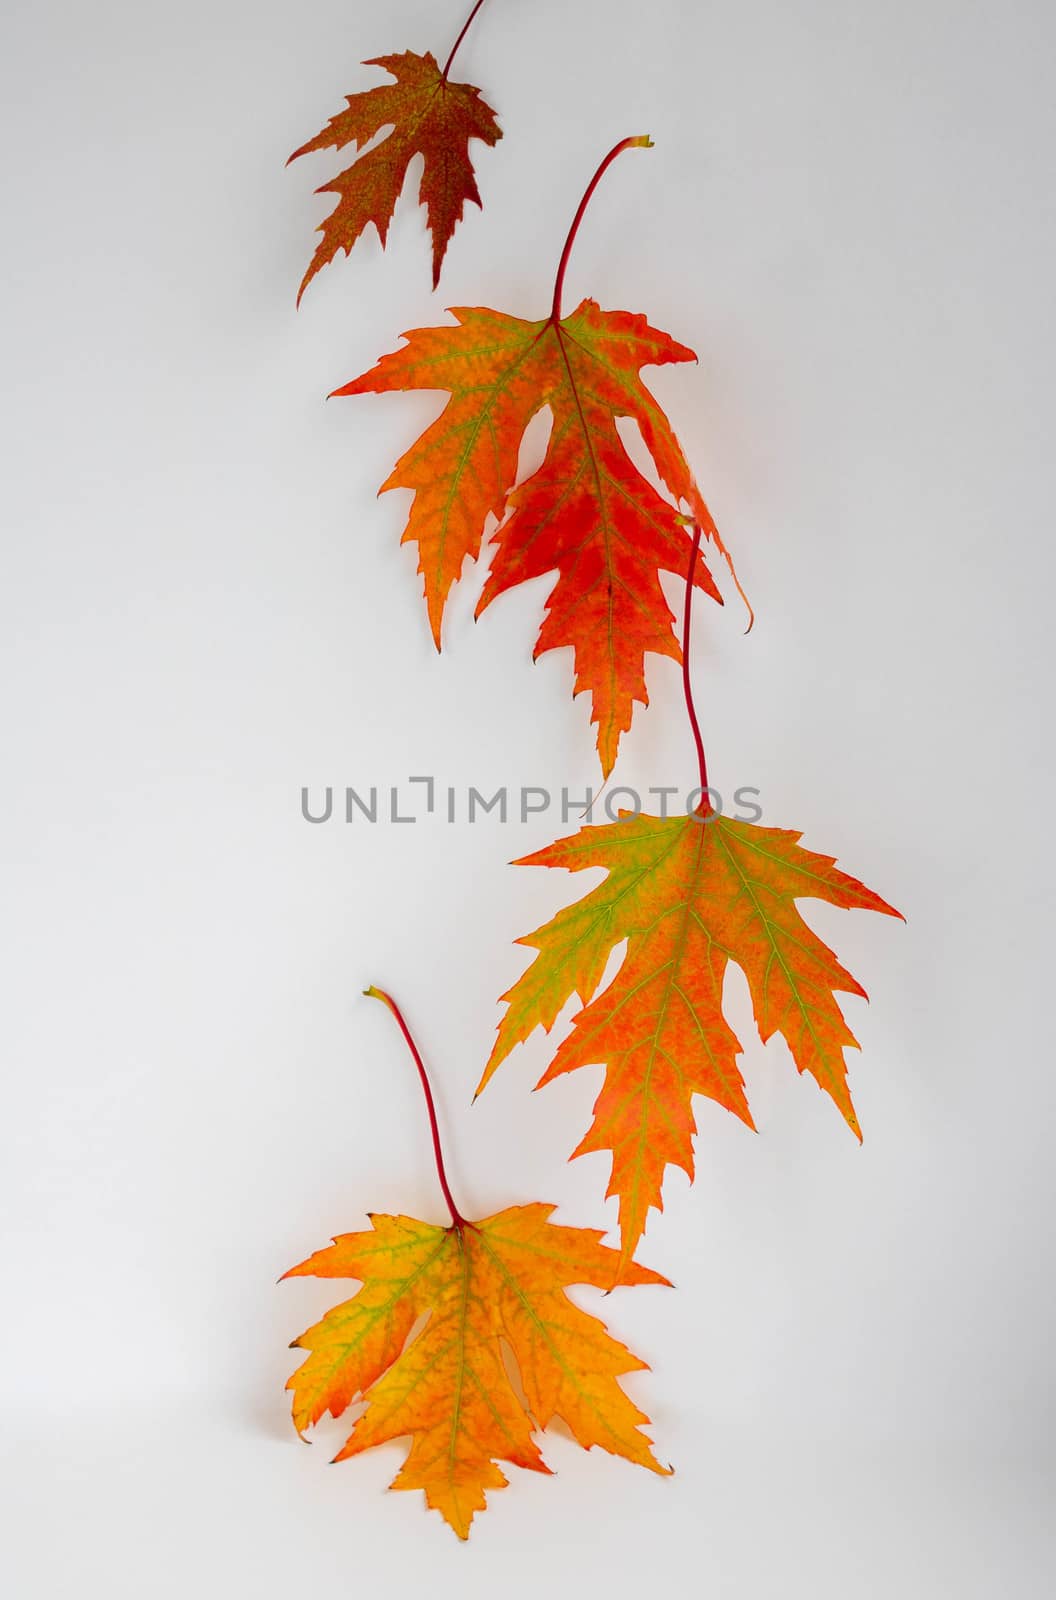 Autumn maple leaves hover on a white background by lapushka62